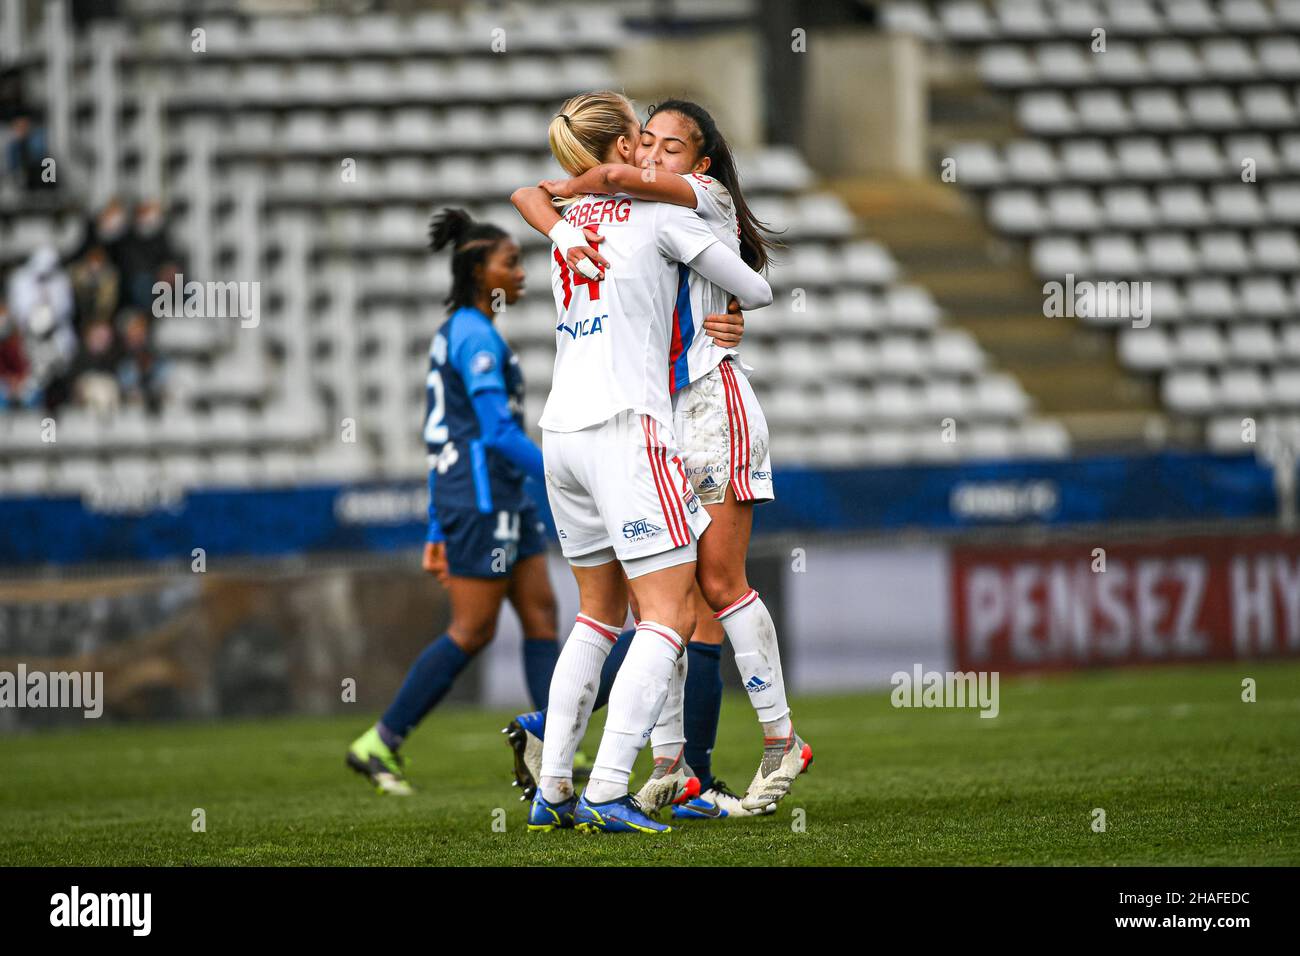 Paris, France. 12th Dec, 2021. Ada Hegerberg and Selma Bacha of Olympique Lyonnais during the Women's French championship, D1 Arkema football match between Paris FC and Olympique Lyonnais (OL) on December 12, 2021 at Charlety Stadium in Paris, France. Photo by Victor Joly/ABACAPRESS.COM Credit: Victor Joly/Alamy Live News Stock Photo